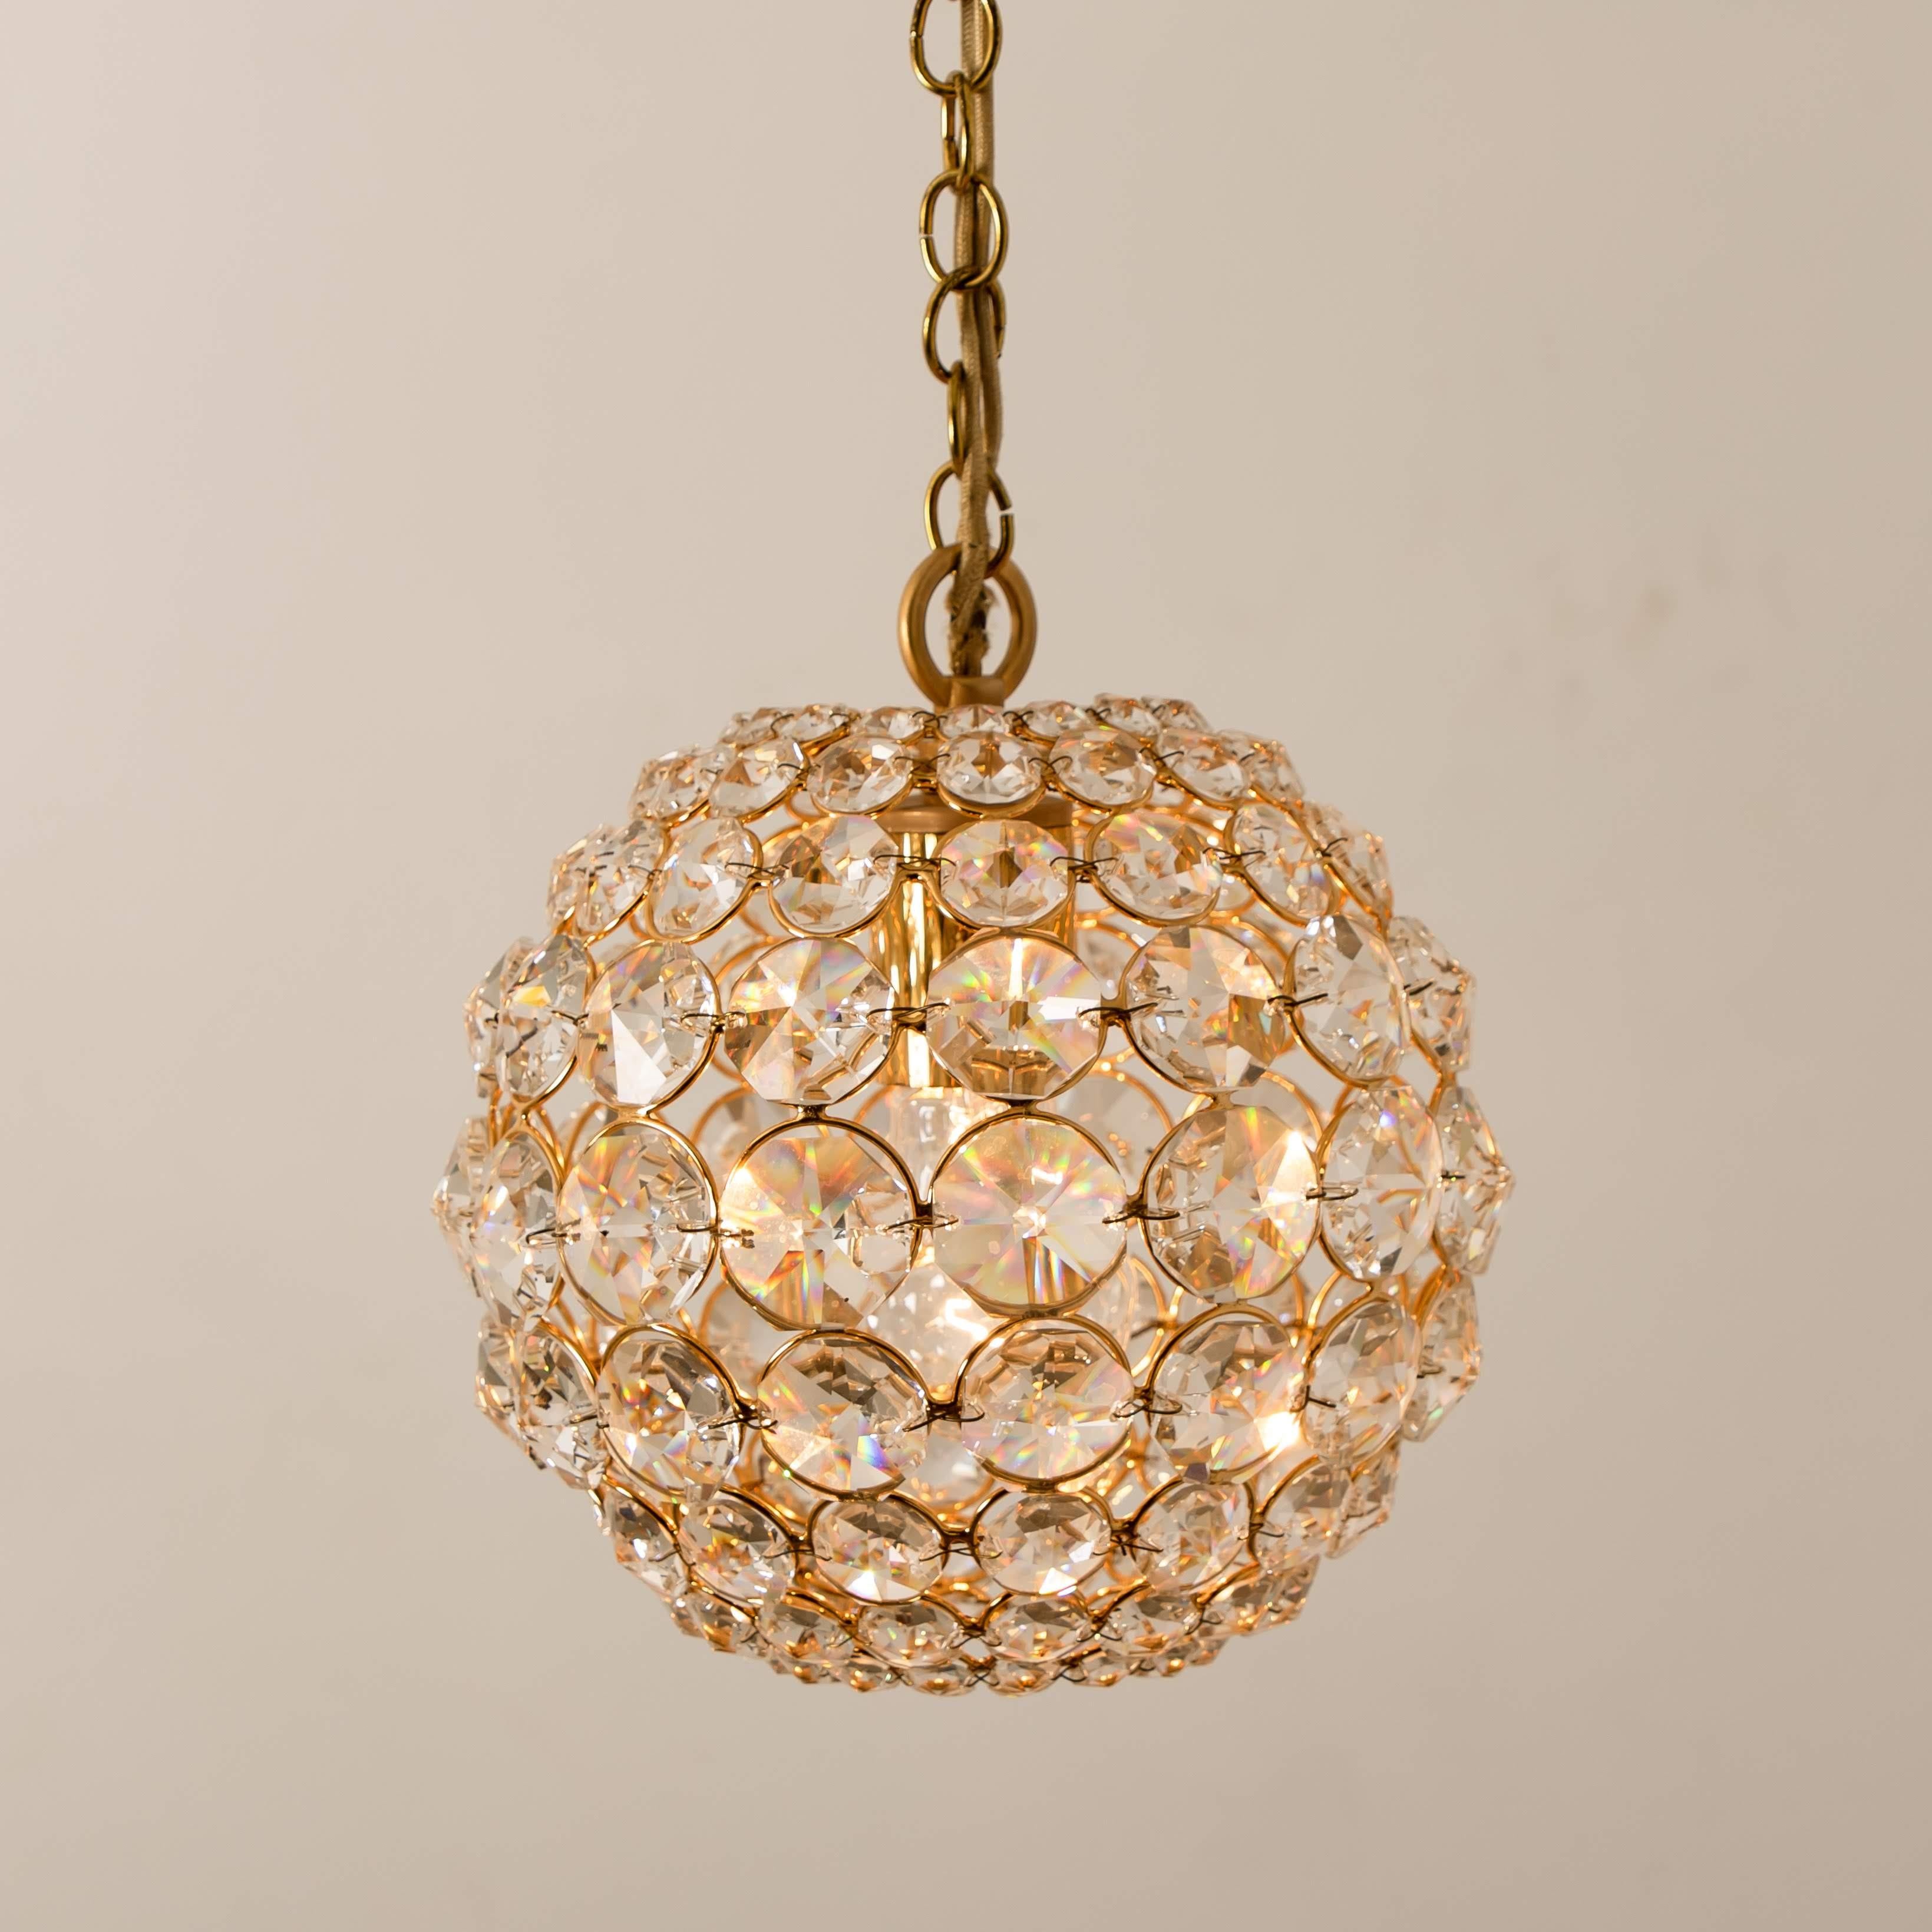 Mid-20th Century Small Gold-Plated Brass and Crystal Pendant Lamp from Palwa, 1960s